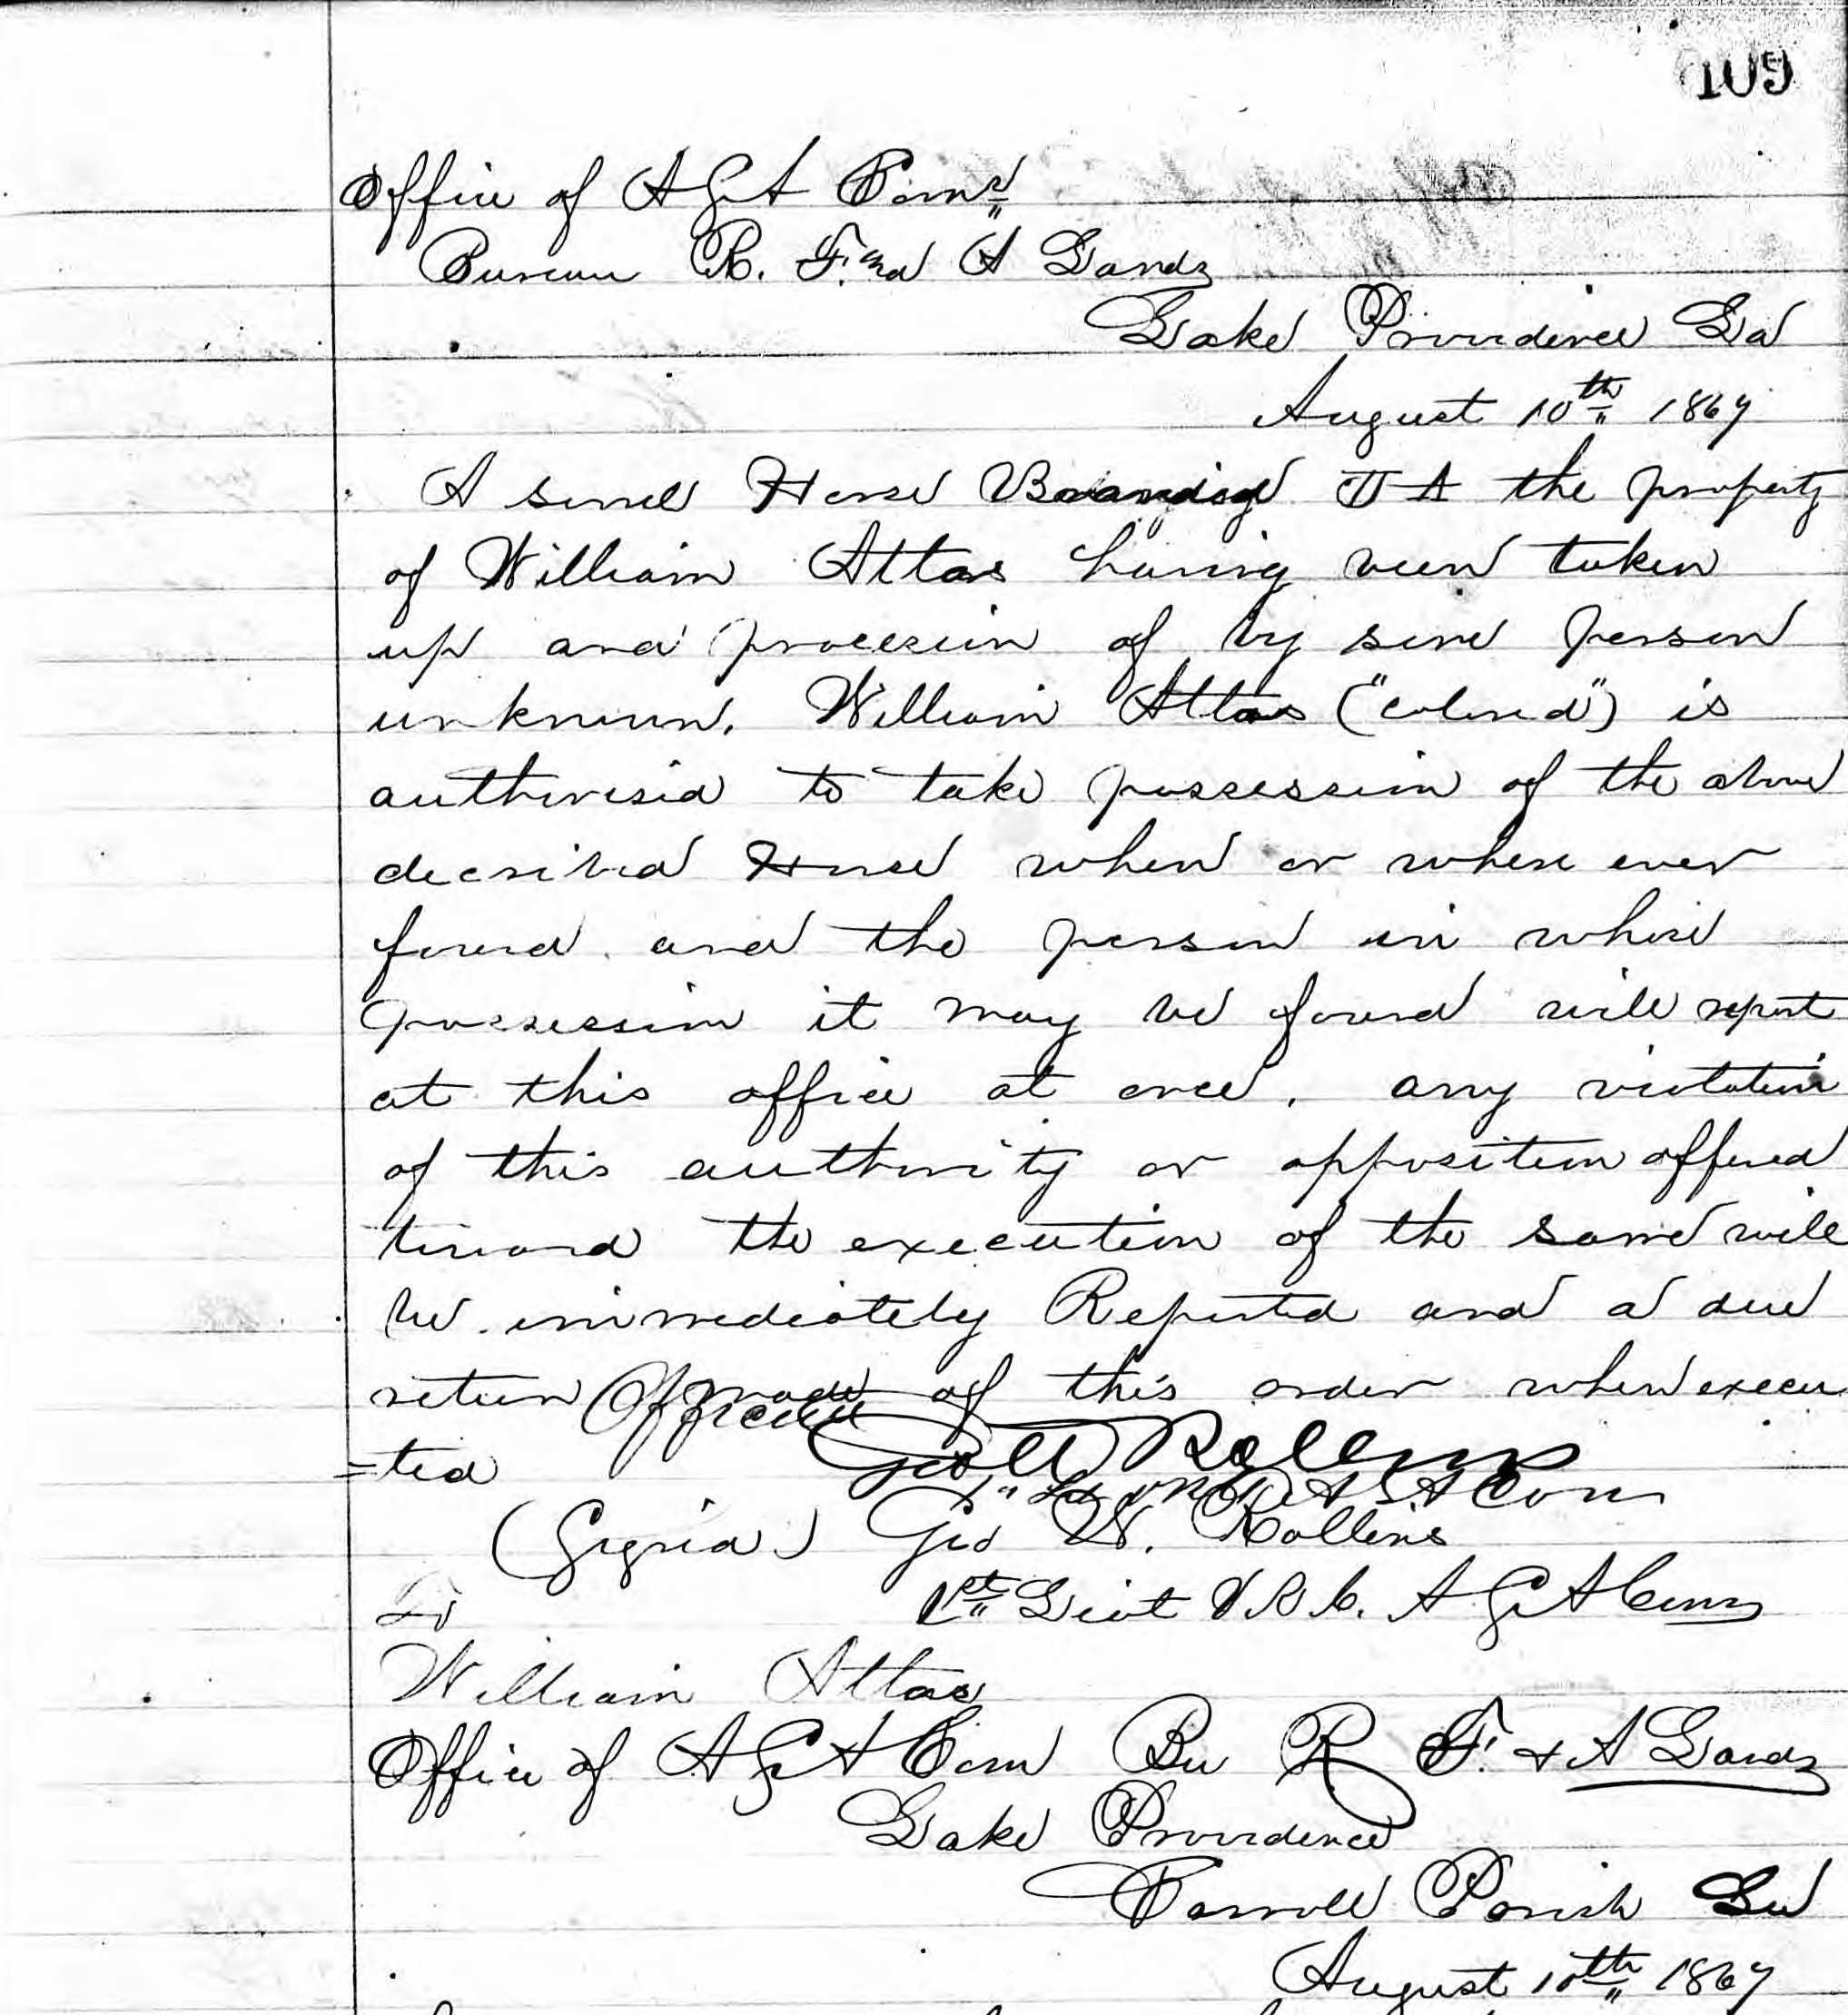 August 10, 1867 letter written on behalf of William S. Atlas by George W. Rollins, Lake Providence, Louisiana Freedmen's Bureau field office agent. The letter details a request for the return of a stolen horse.